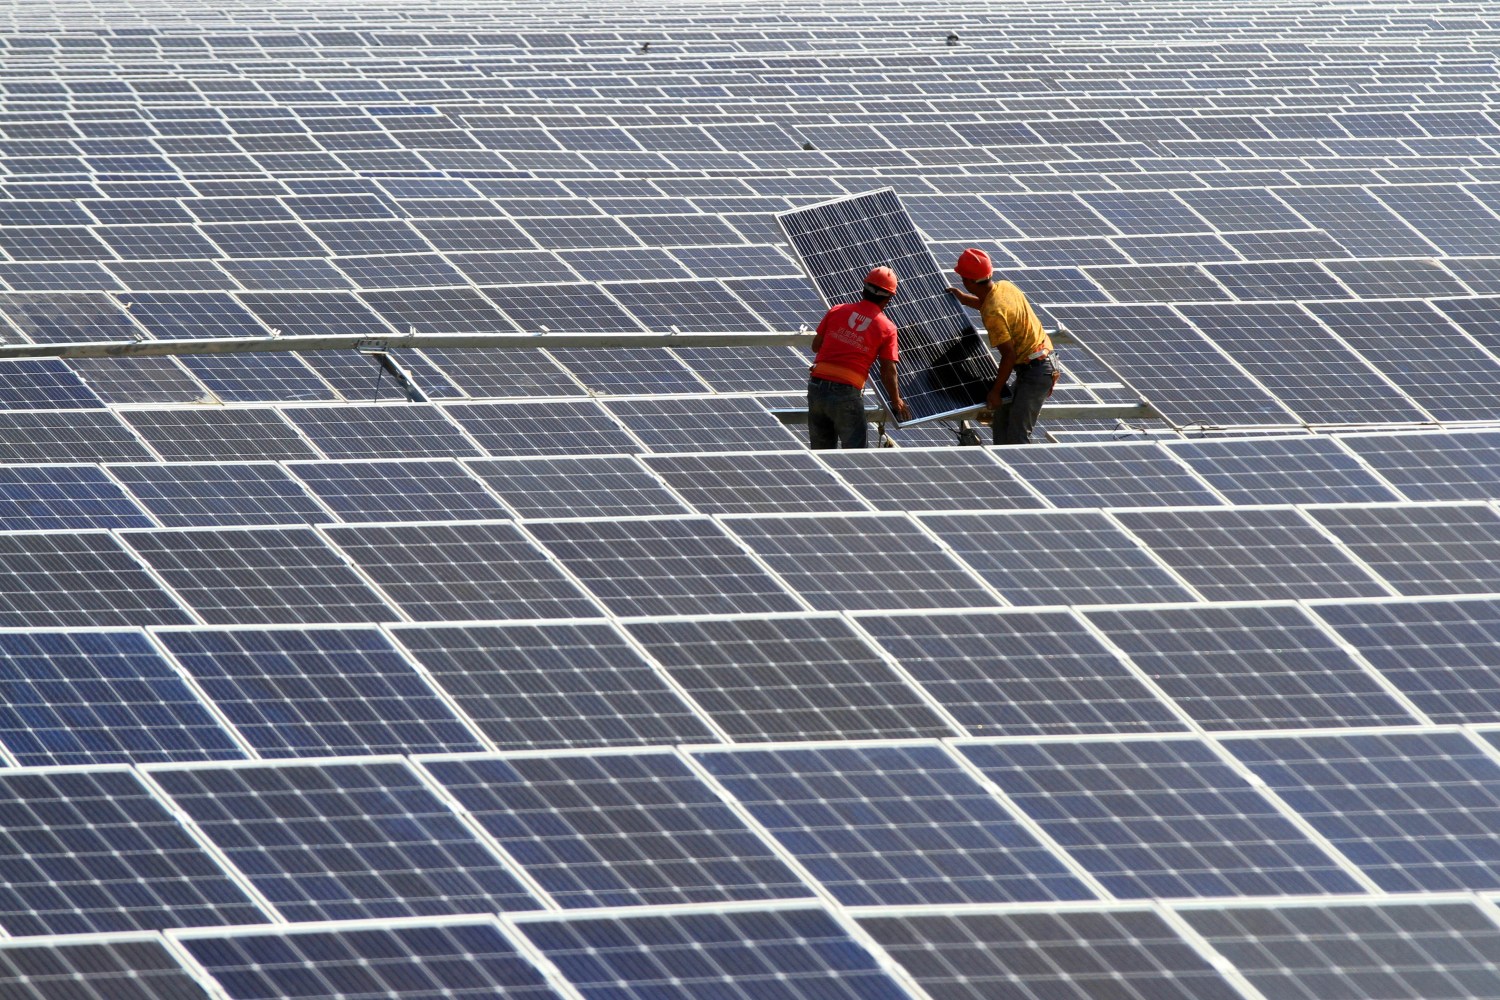 Chinese workers install solar panels at a photovoltaic power station in Huaian city, east China's Jiangsu province, 23 June 2018. Policy change reflected regulators' concerns that the industry has become "overprotected" with incentives resulting in excess capacity and wasted investment. With tightening policies, many of them are likely to fail, analysts said. The sunny summer for China's solar industry is seemingly coming to an end after regulators abruptly put the brakes on subsidies that have fueled the industry's boom for nearly a decade while also raising concerns of a glut.No Use China. No Use France.